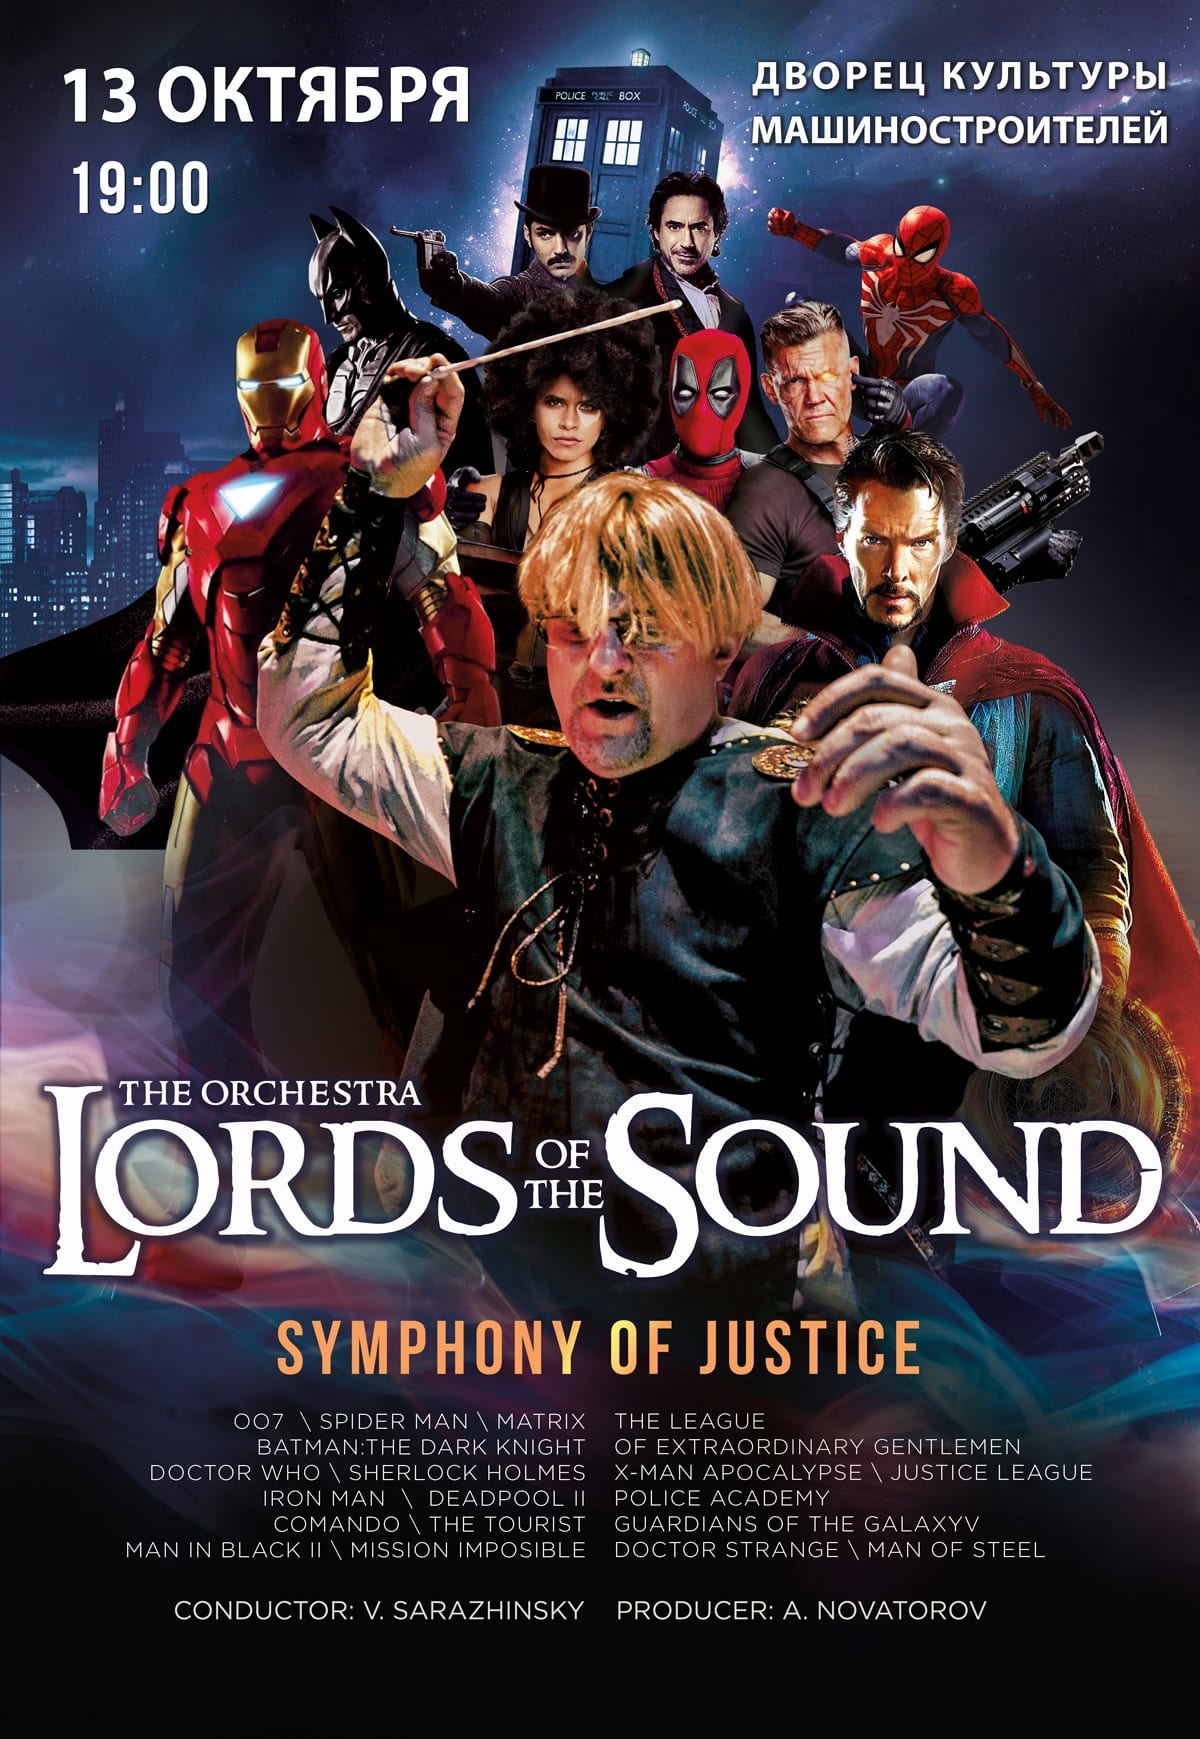 LORDS OF THE SOUND - «Symphony of justice» - Днепр, цена, дата